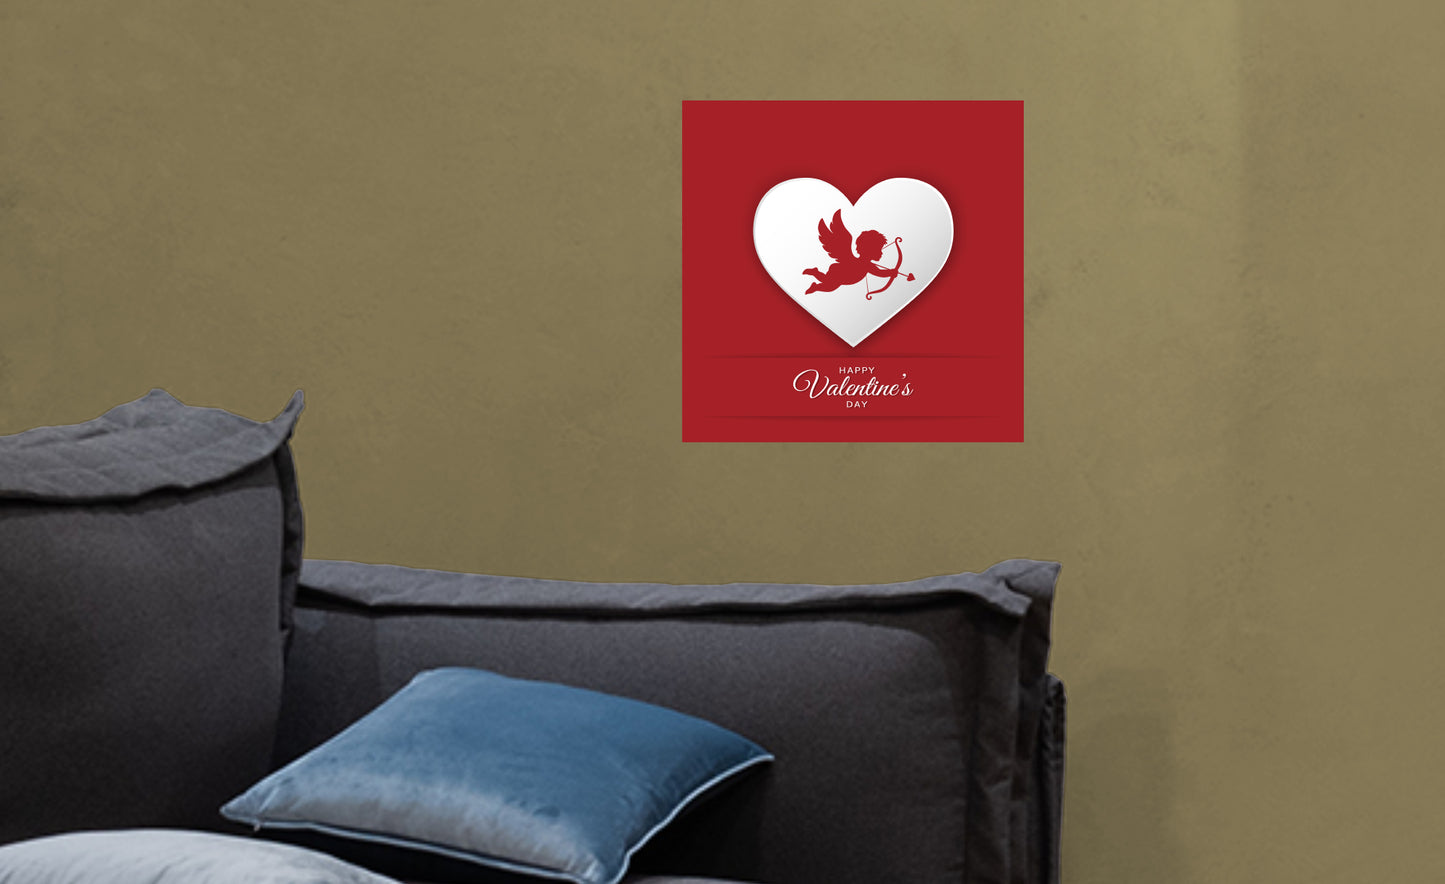 Valentine's Day: Red Cupid Mural        -   Removable     Adhesive Decal